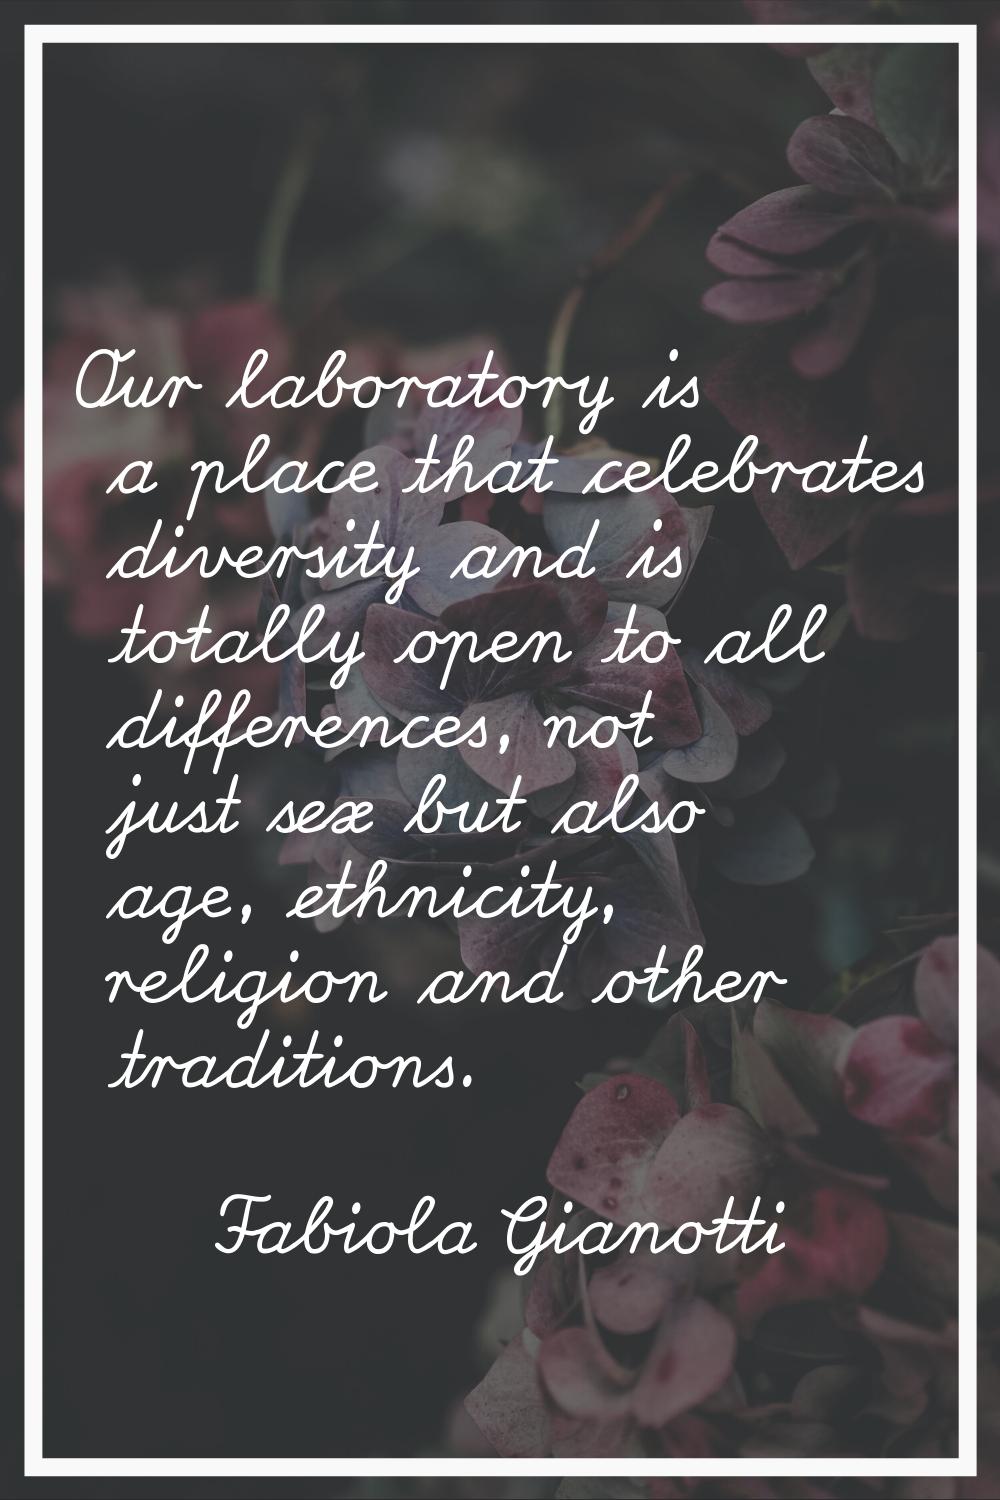 Our laboratory is a place that celebrates diversity and is totally open to all differences, not jus